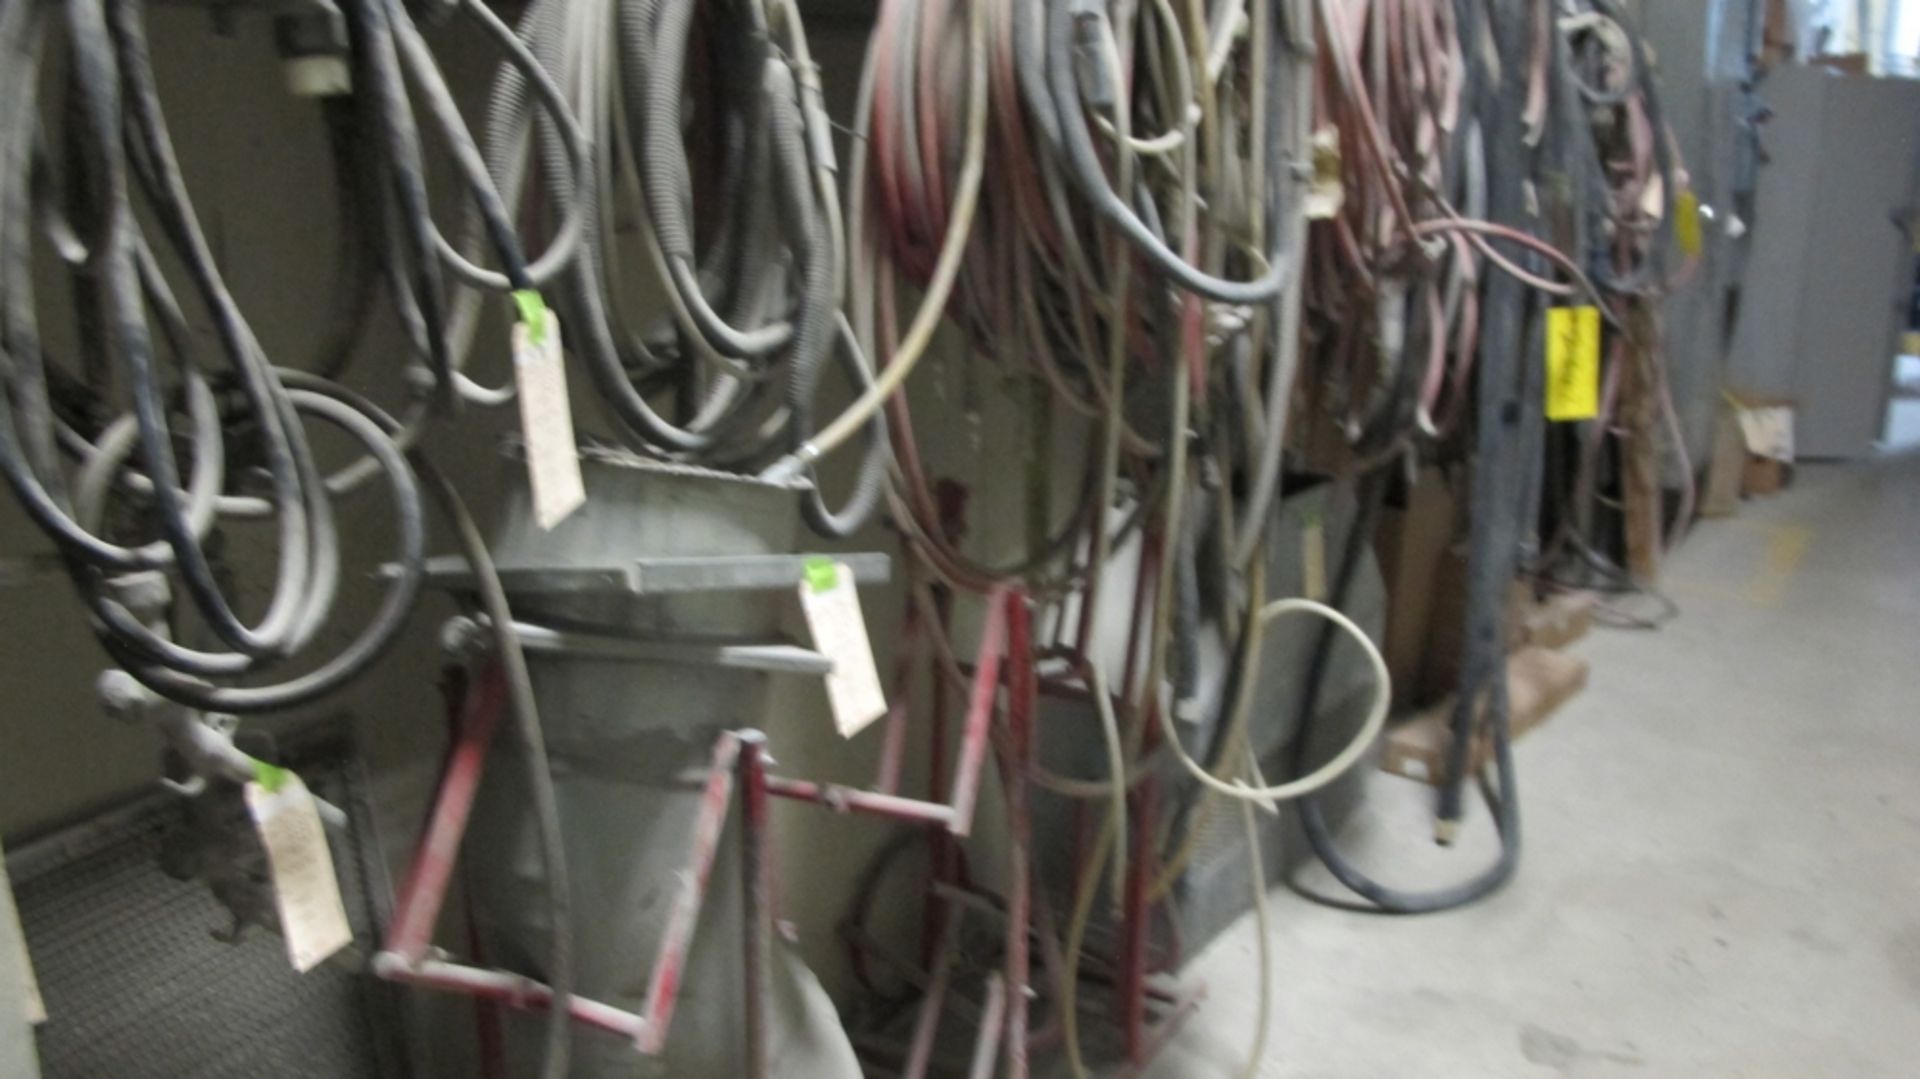 LOT OF 2 DOOR METAL CABINET W/PARTS AND HANGING HOSES ALONG WALL (100 SHIRLEY AVE KITCHENER) - Image 3 of 3